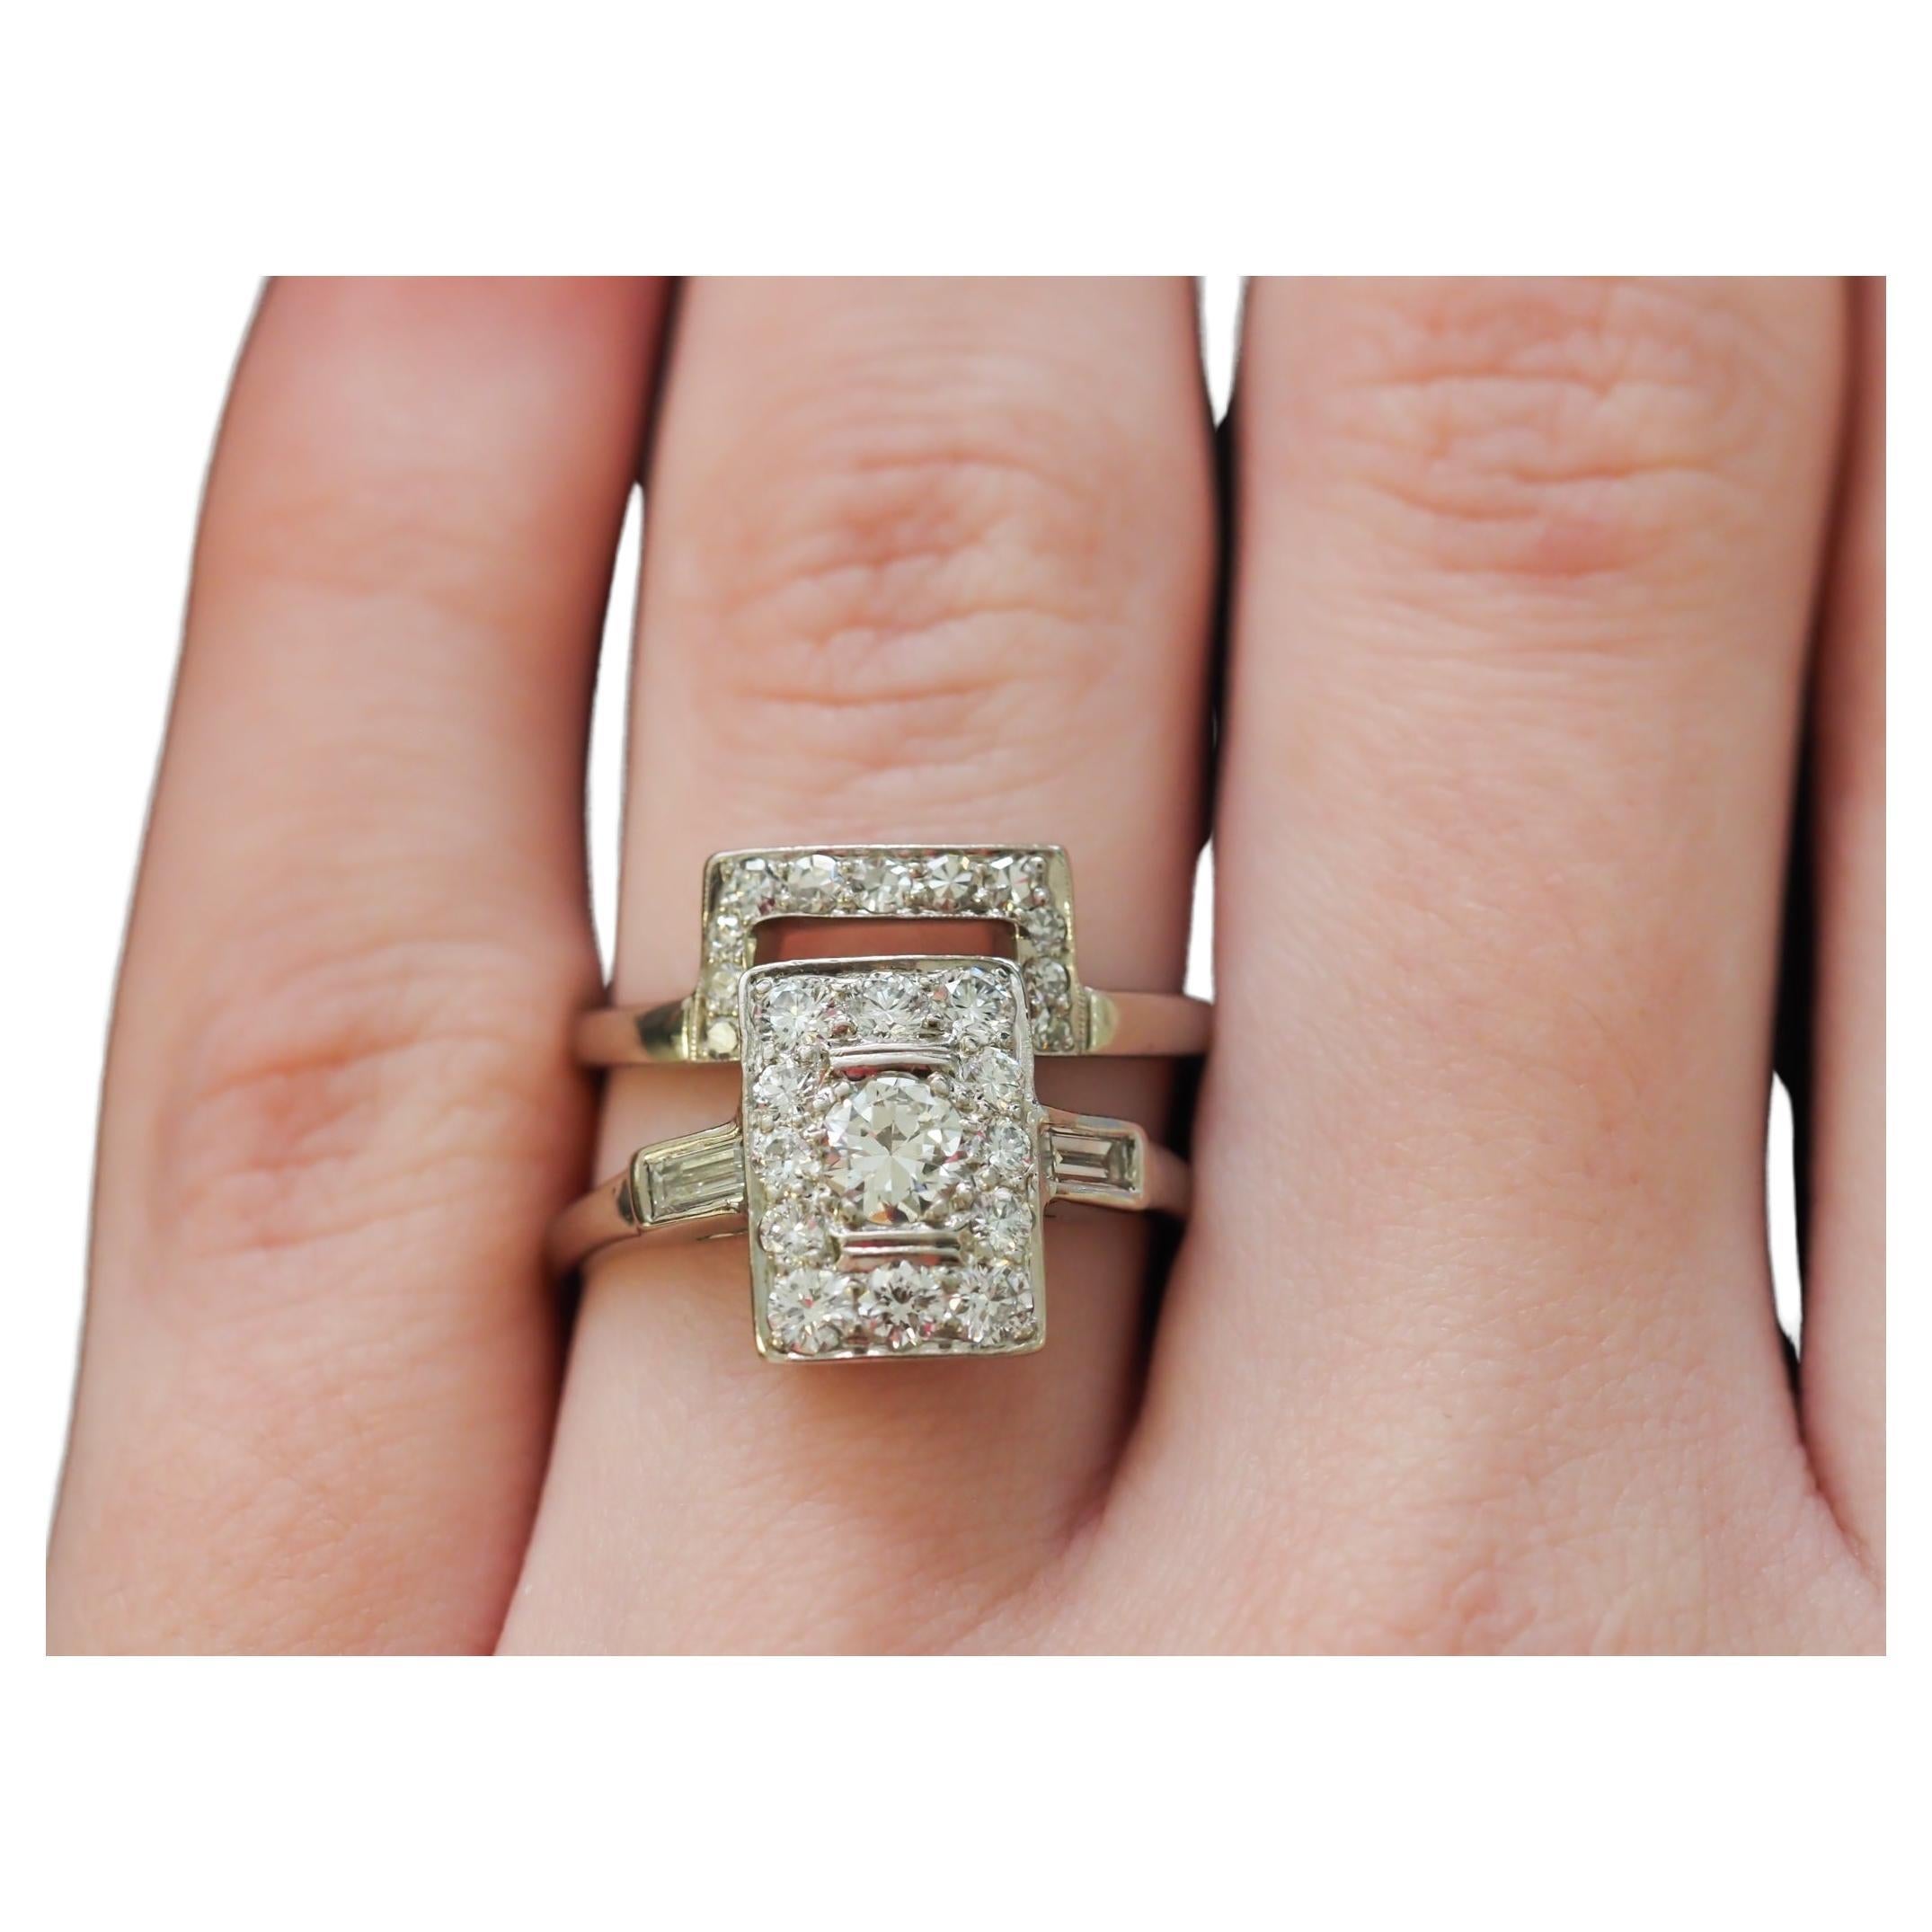 14 Karat White Gold Art Deco Old European Diamond Engagement Ring and Band Set For Sale